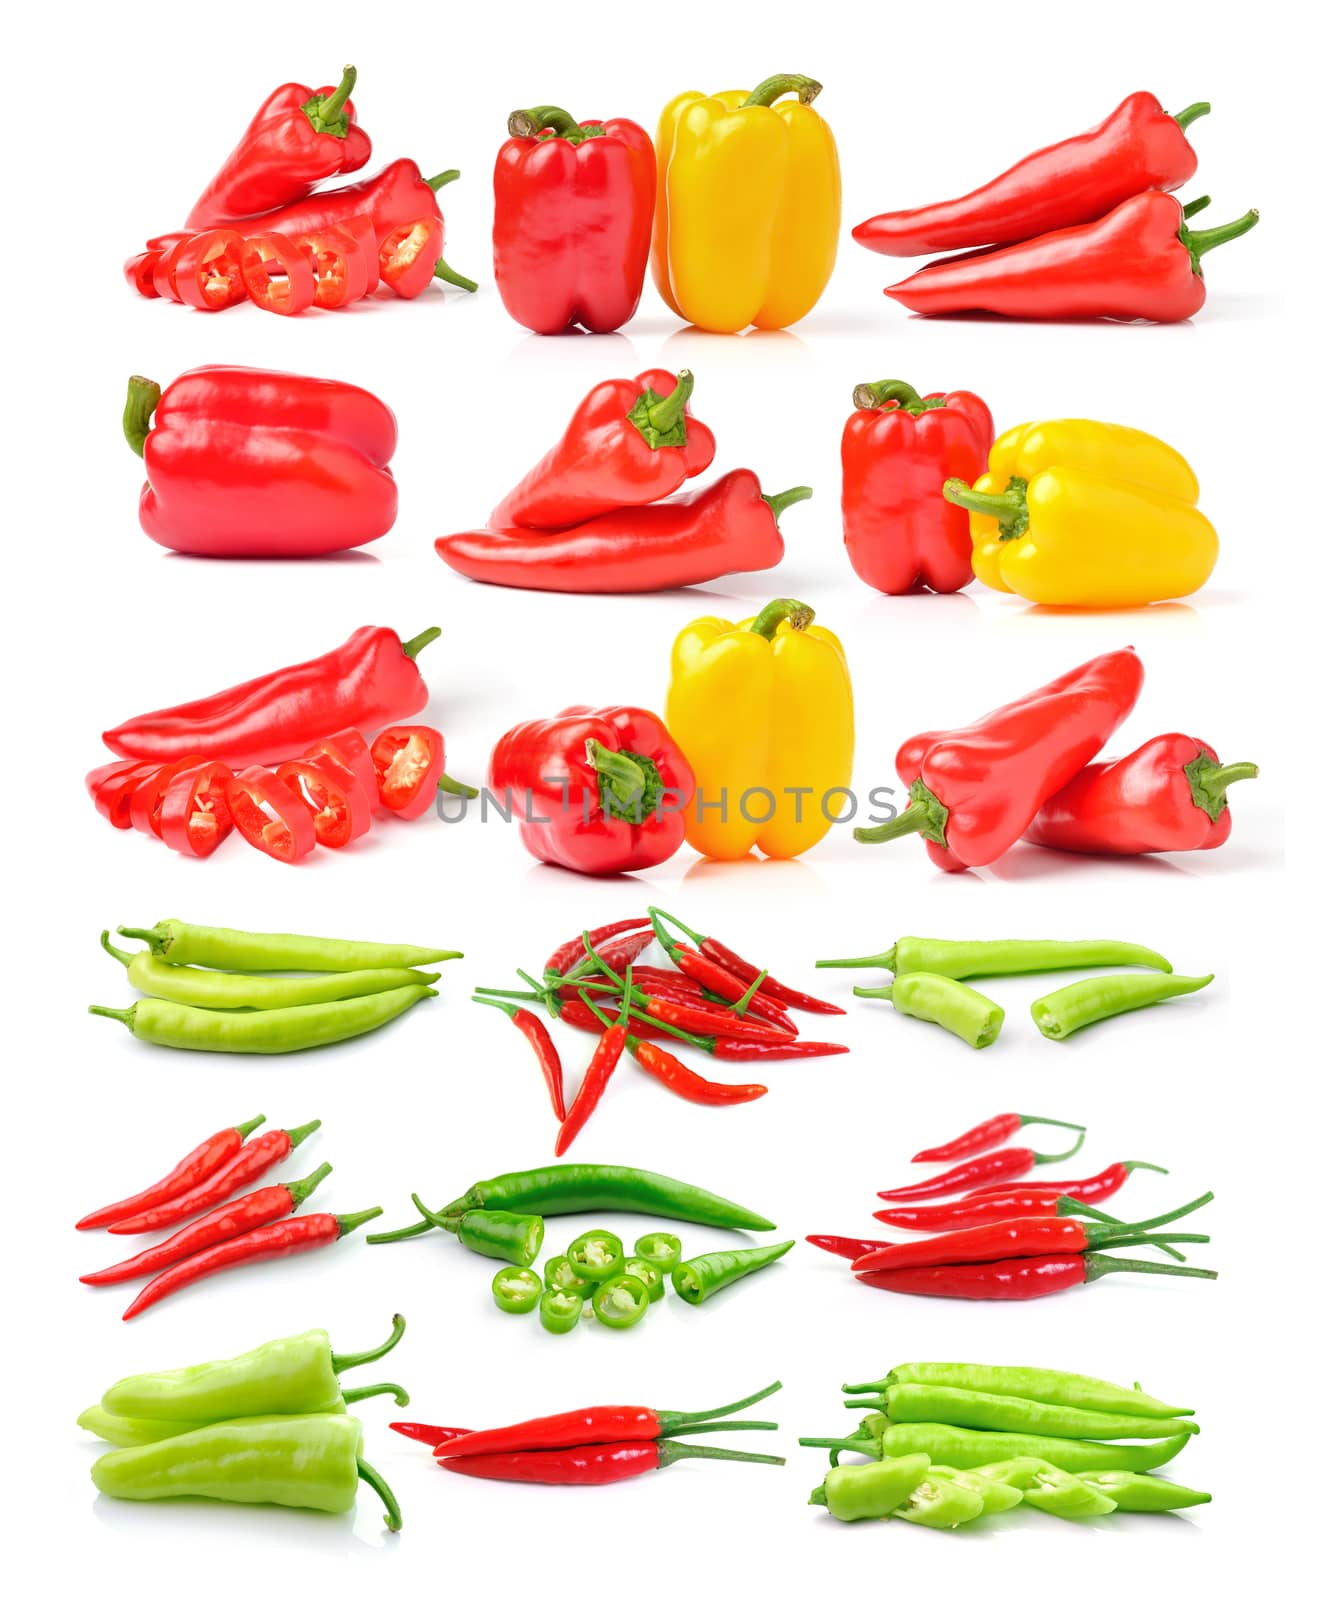 hot chili pepper on white background by sommai